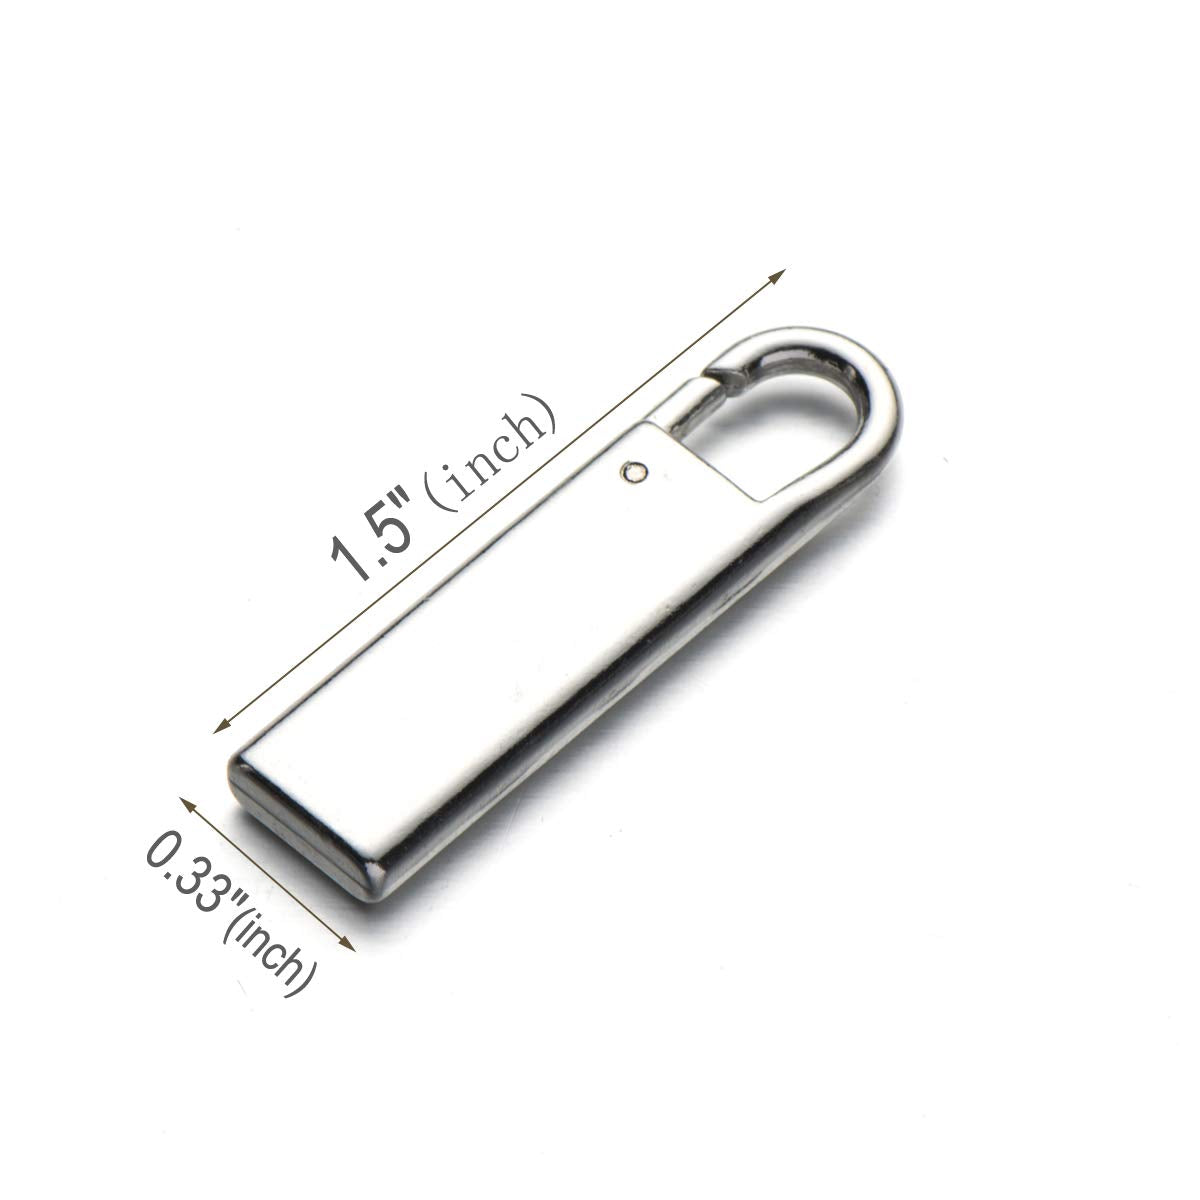 Zipper Pull Replacement Metal Zipper Handle for Luggage Suitcases